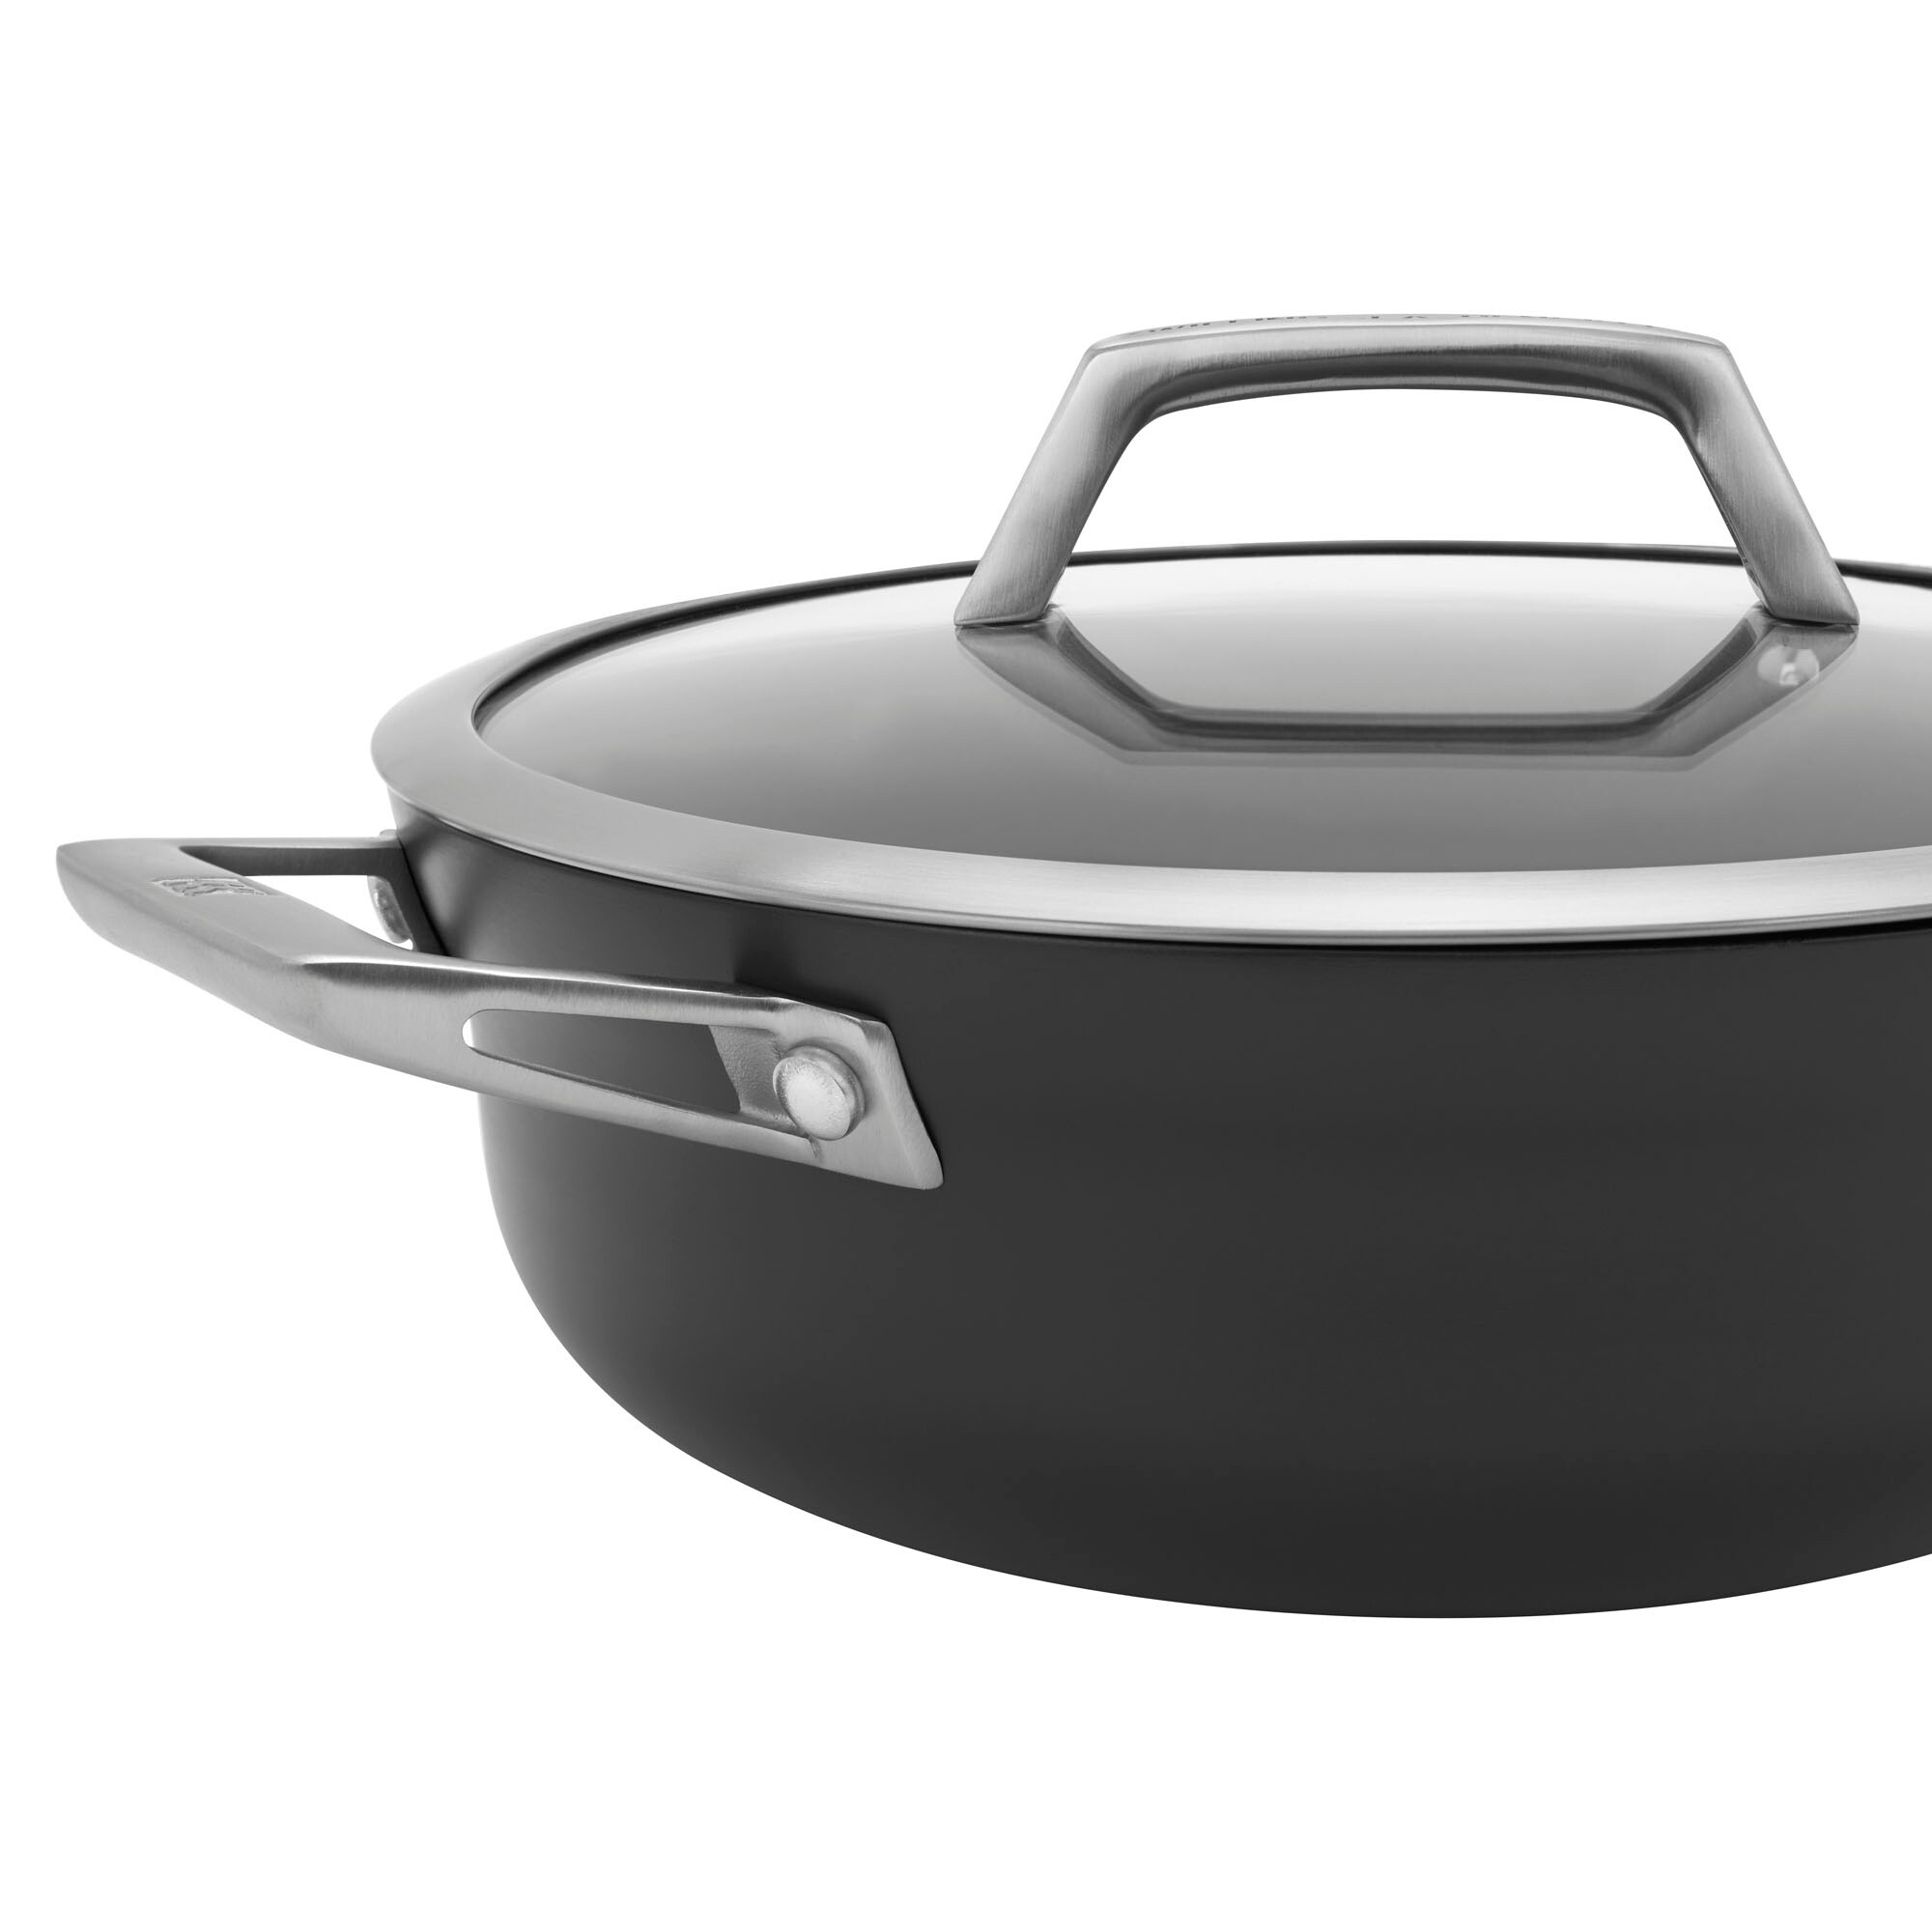 Zwilling Motion Hard-Anodized Aluminum Non-Stick 10-Piece Cookware